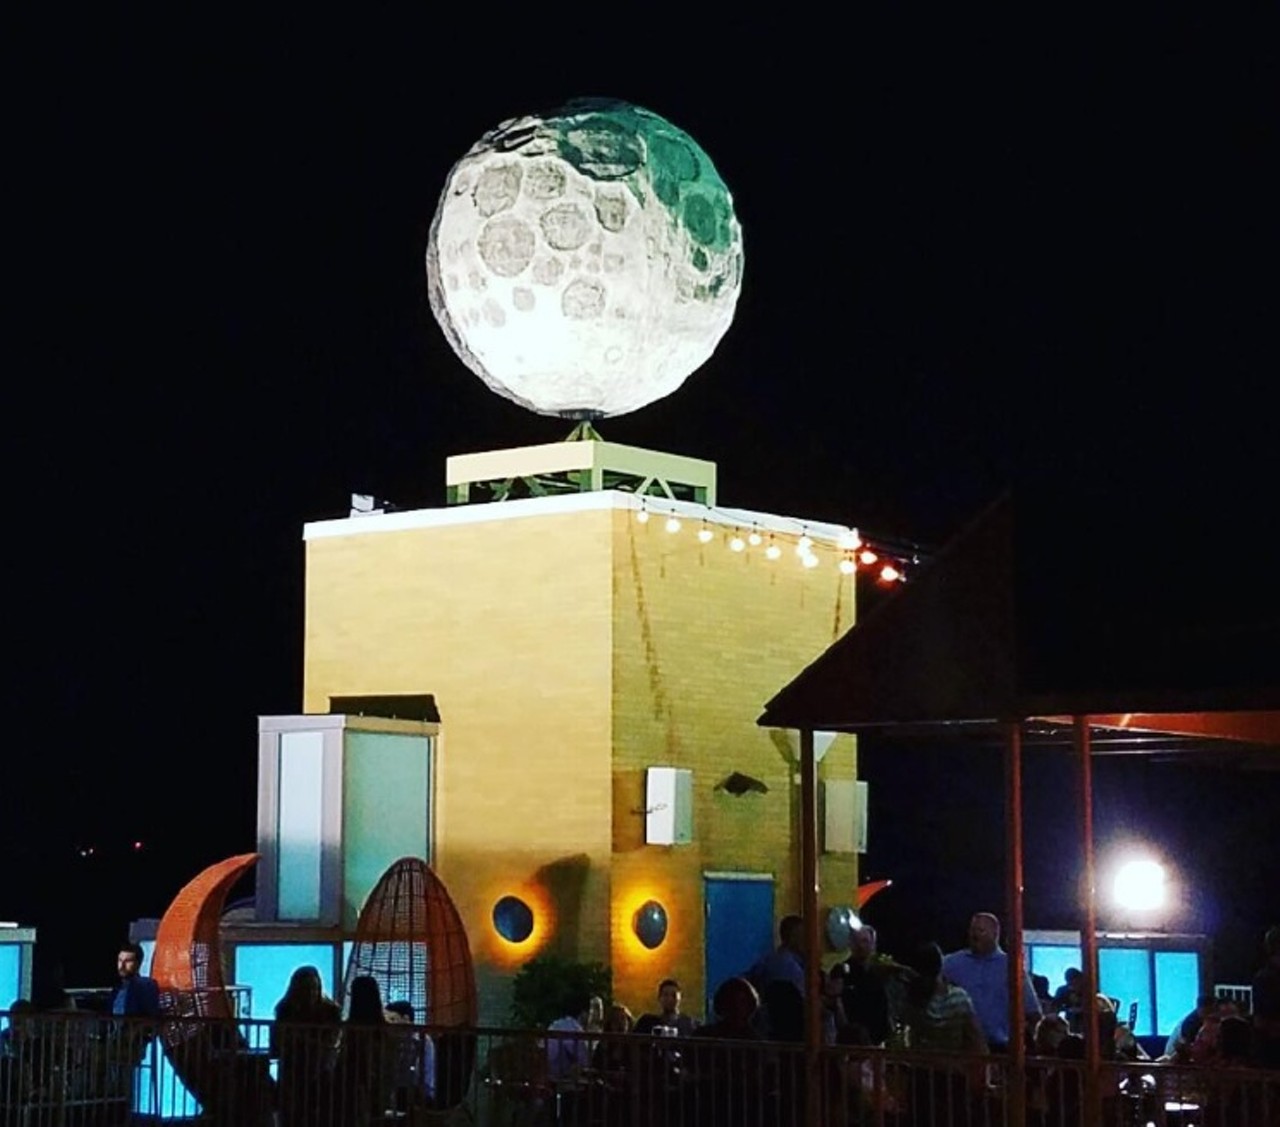 The moon atop the Moonrise Hotel
Stick around an enjoy some drinks at Eclipse, the hotel's rooftop bar. RFT Instagram photo.